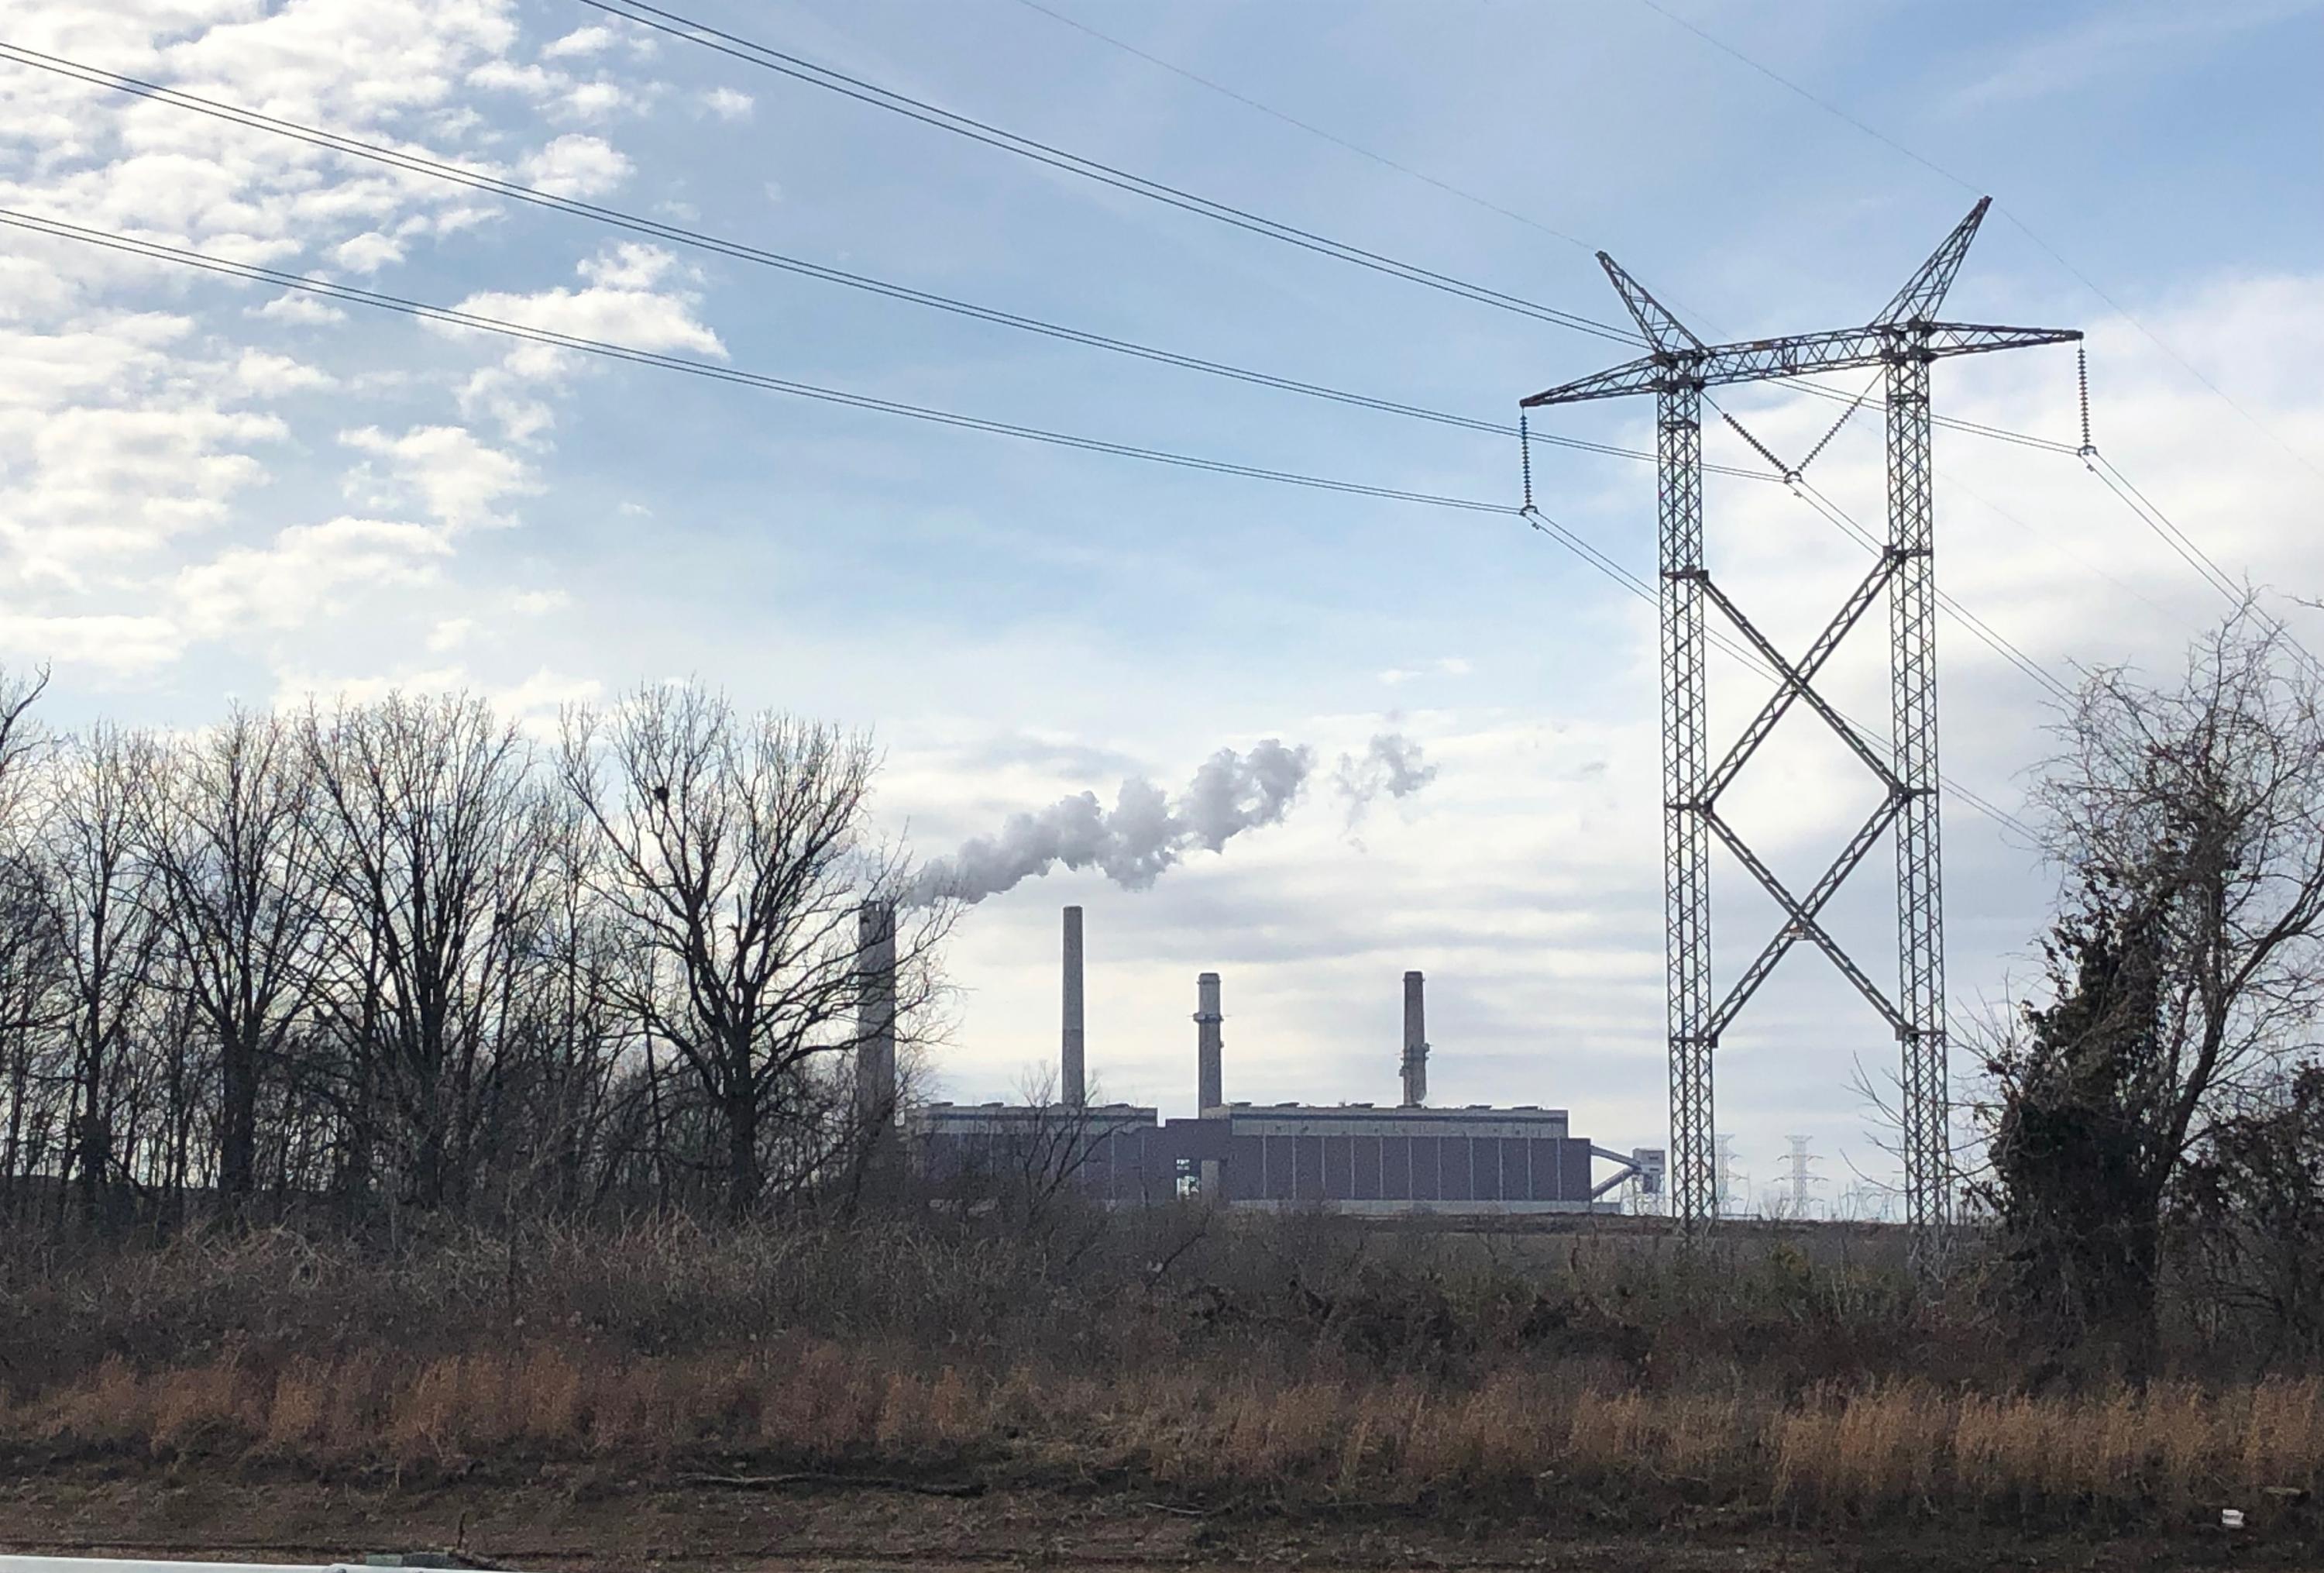 The Gibson Generating Station is a coal-burning power plant located in Gibson County, Indiana. (Credit: Emily Grubert, Georgia Tech)